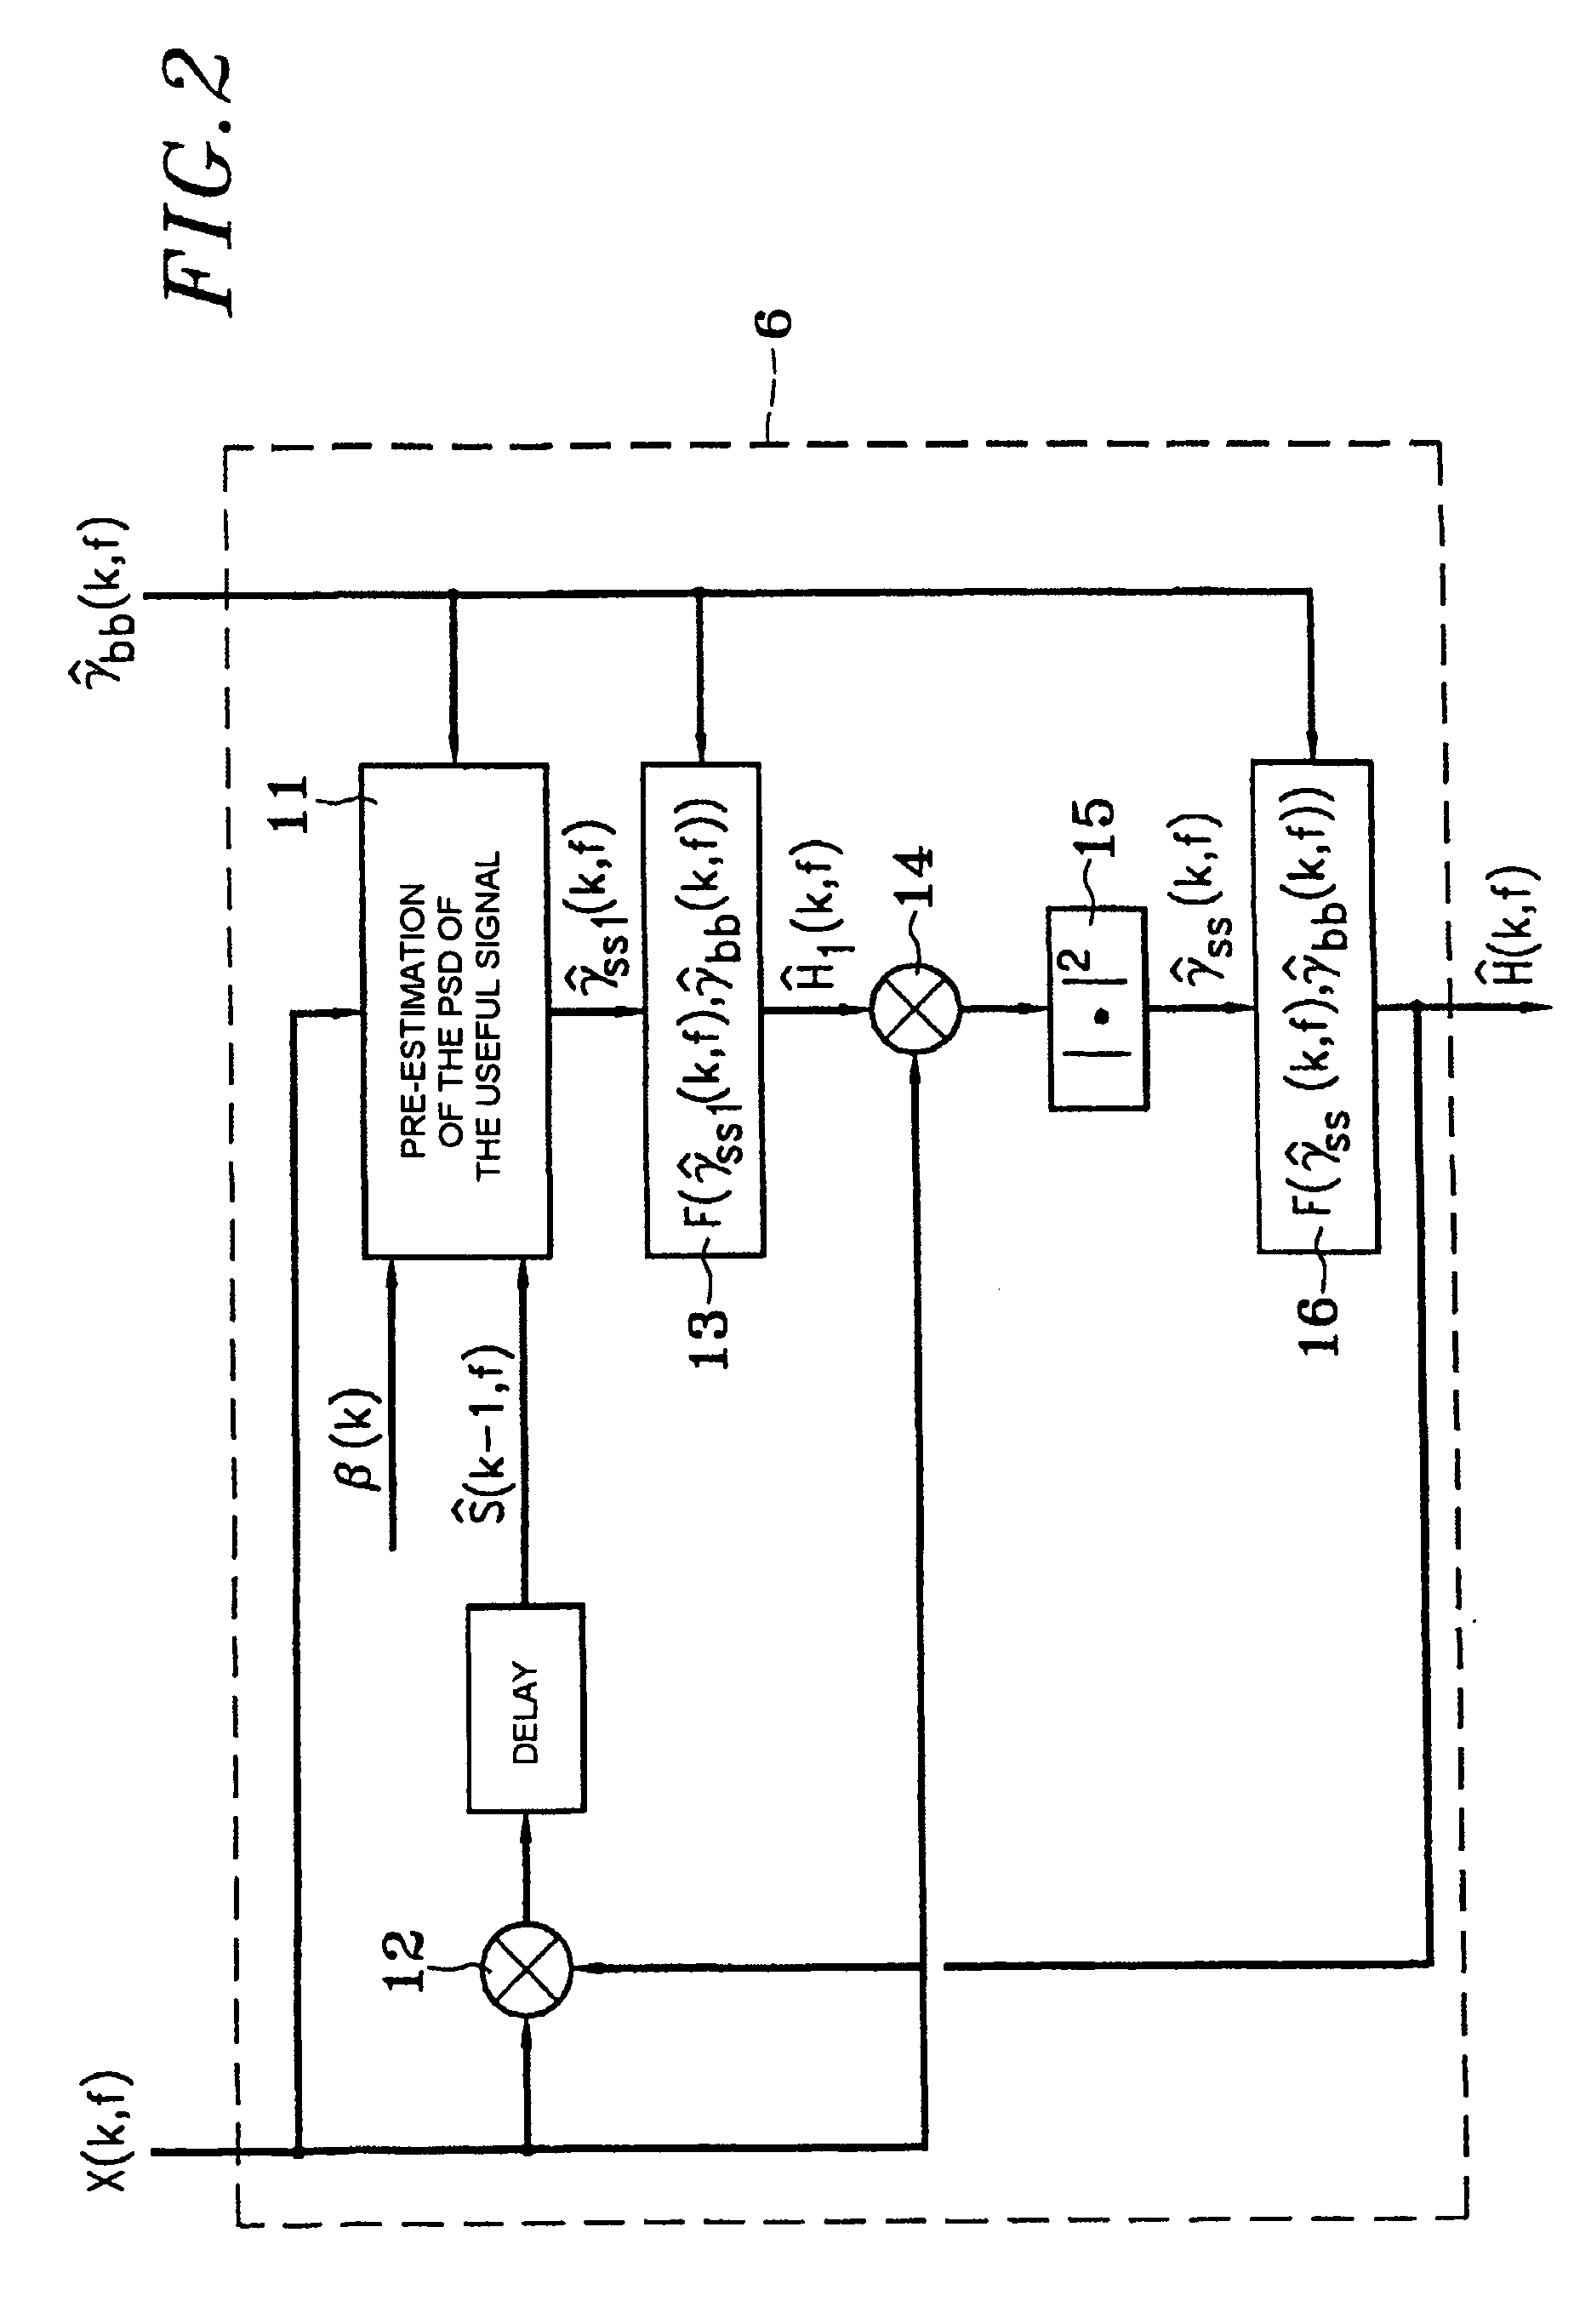 Noise reduction method and device using two pass filtering